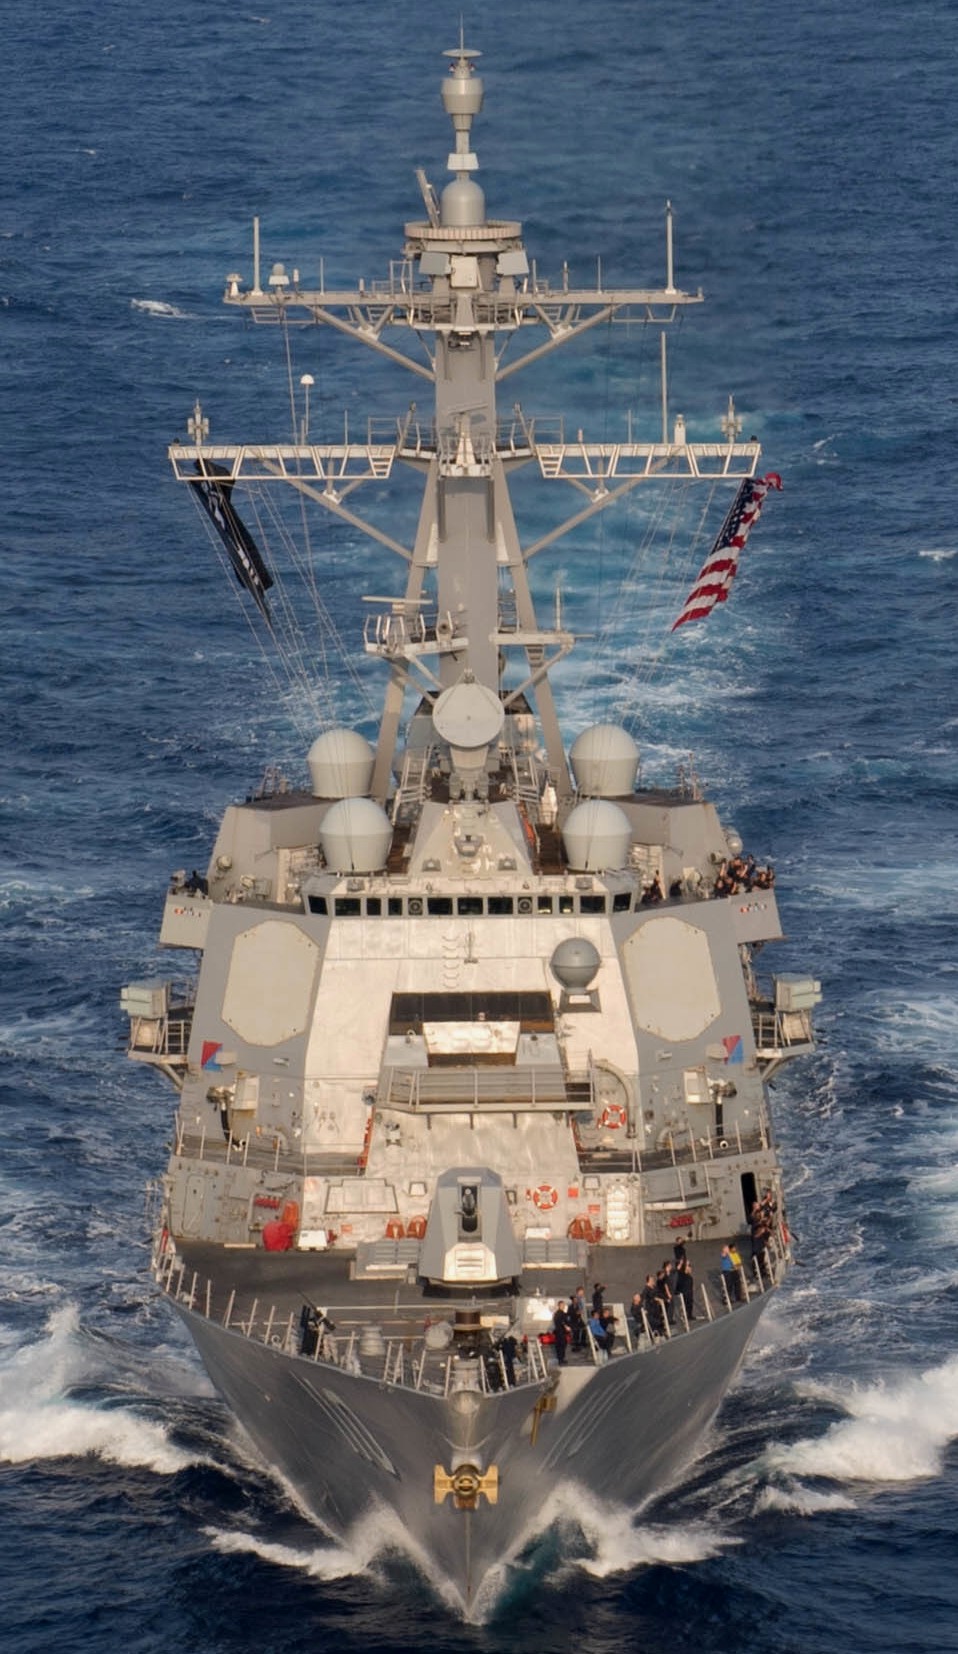 ddg-110 uss william p. lawrence arleigh burke class guided missile destroyer aegis us navy pacific ocean 38